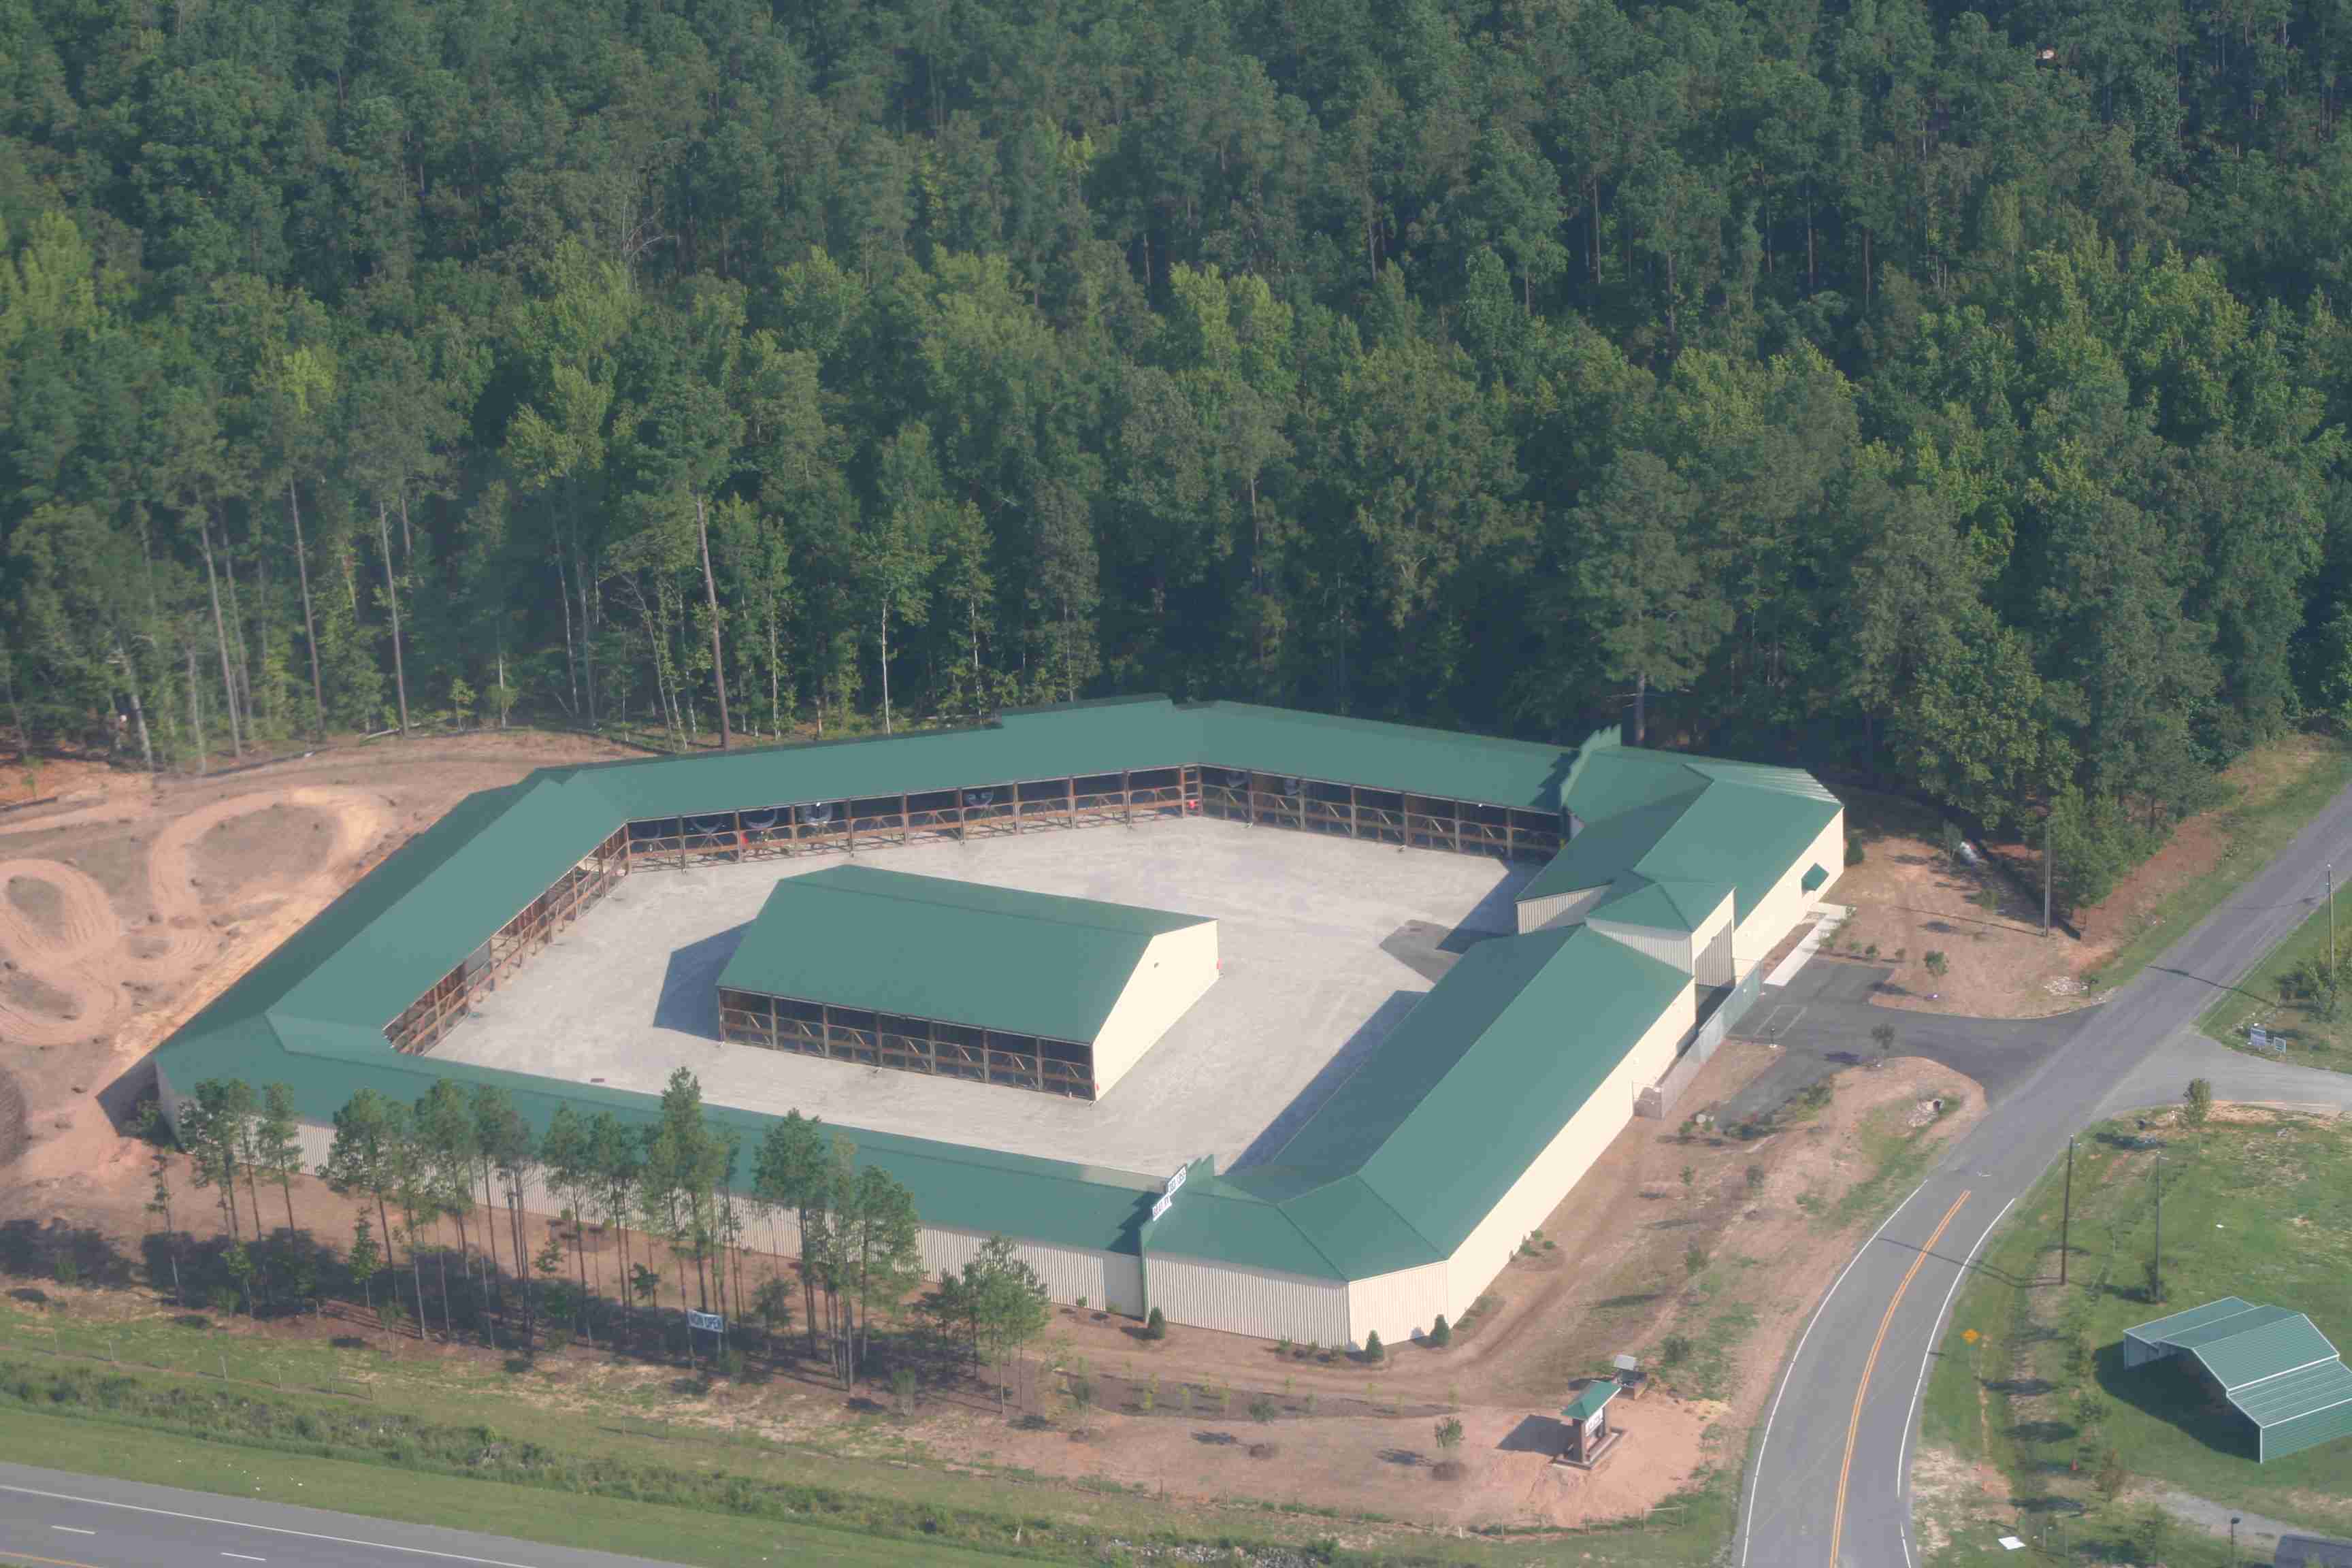 Ariel View of Facility